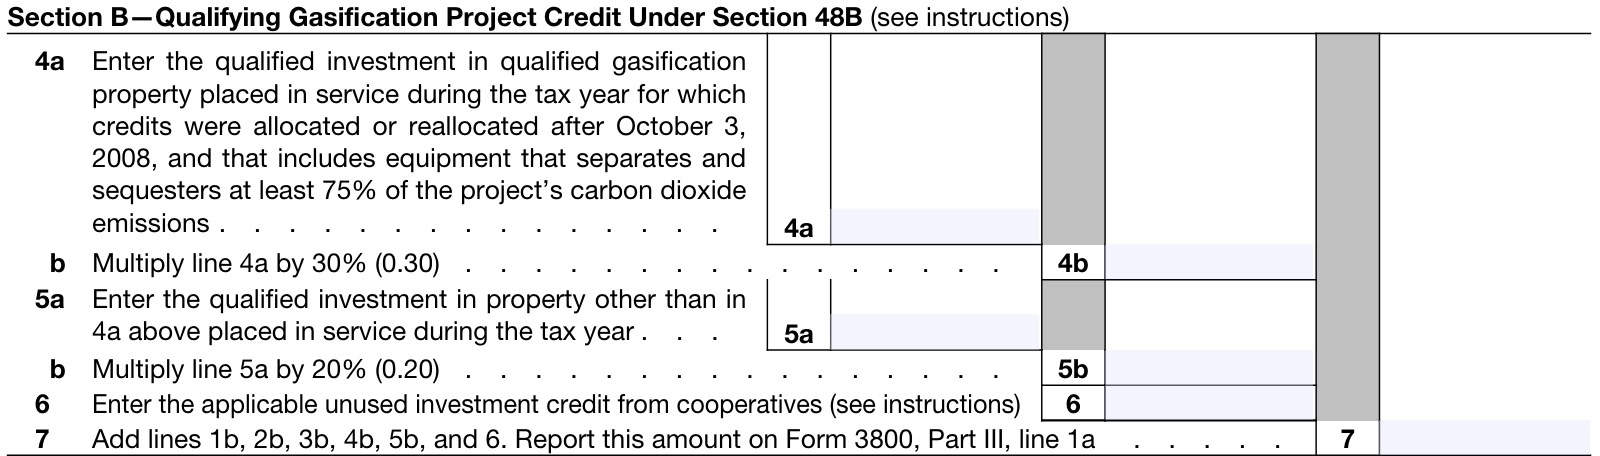 Part II, Section B: Qualifying gasification project credit